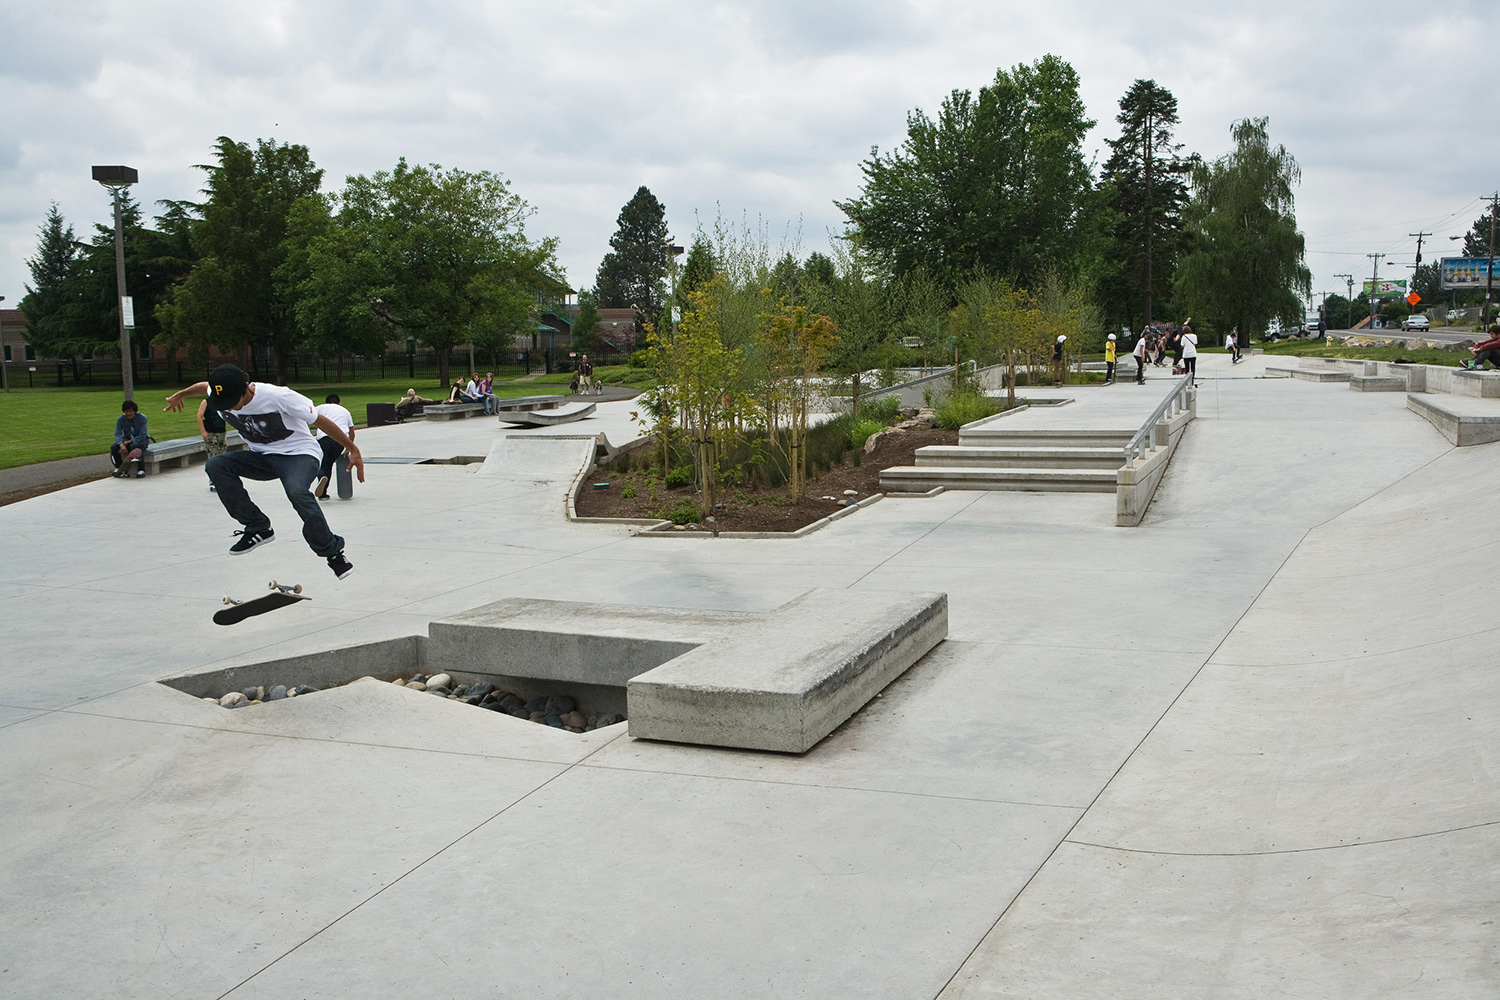  Ed Benedict Skate Plaza offers plenty of ledge features and challenging urban terrain for Portland’s street skating community. 